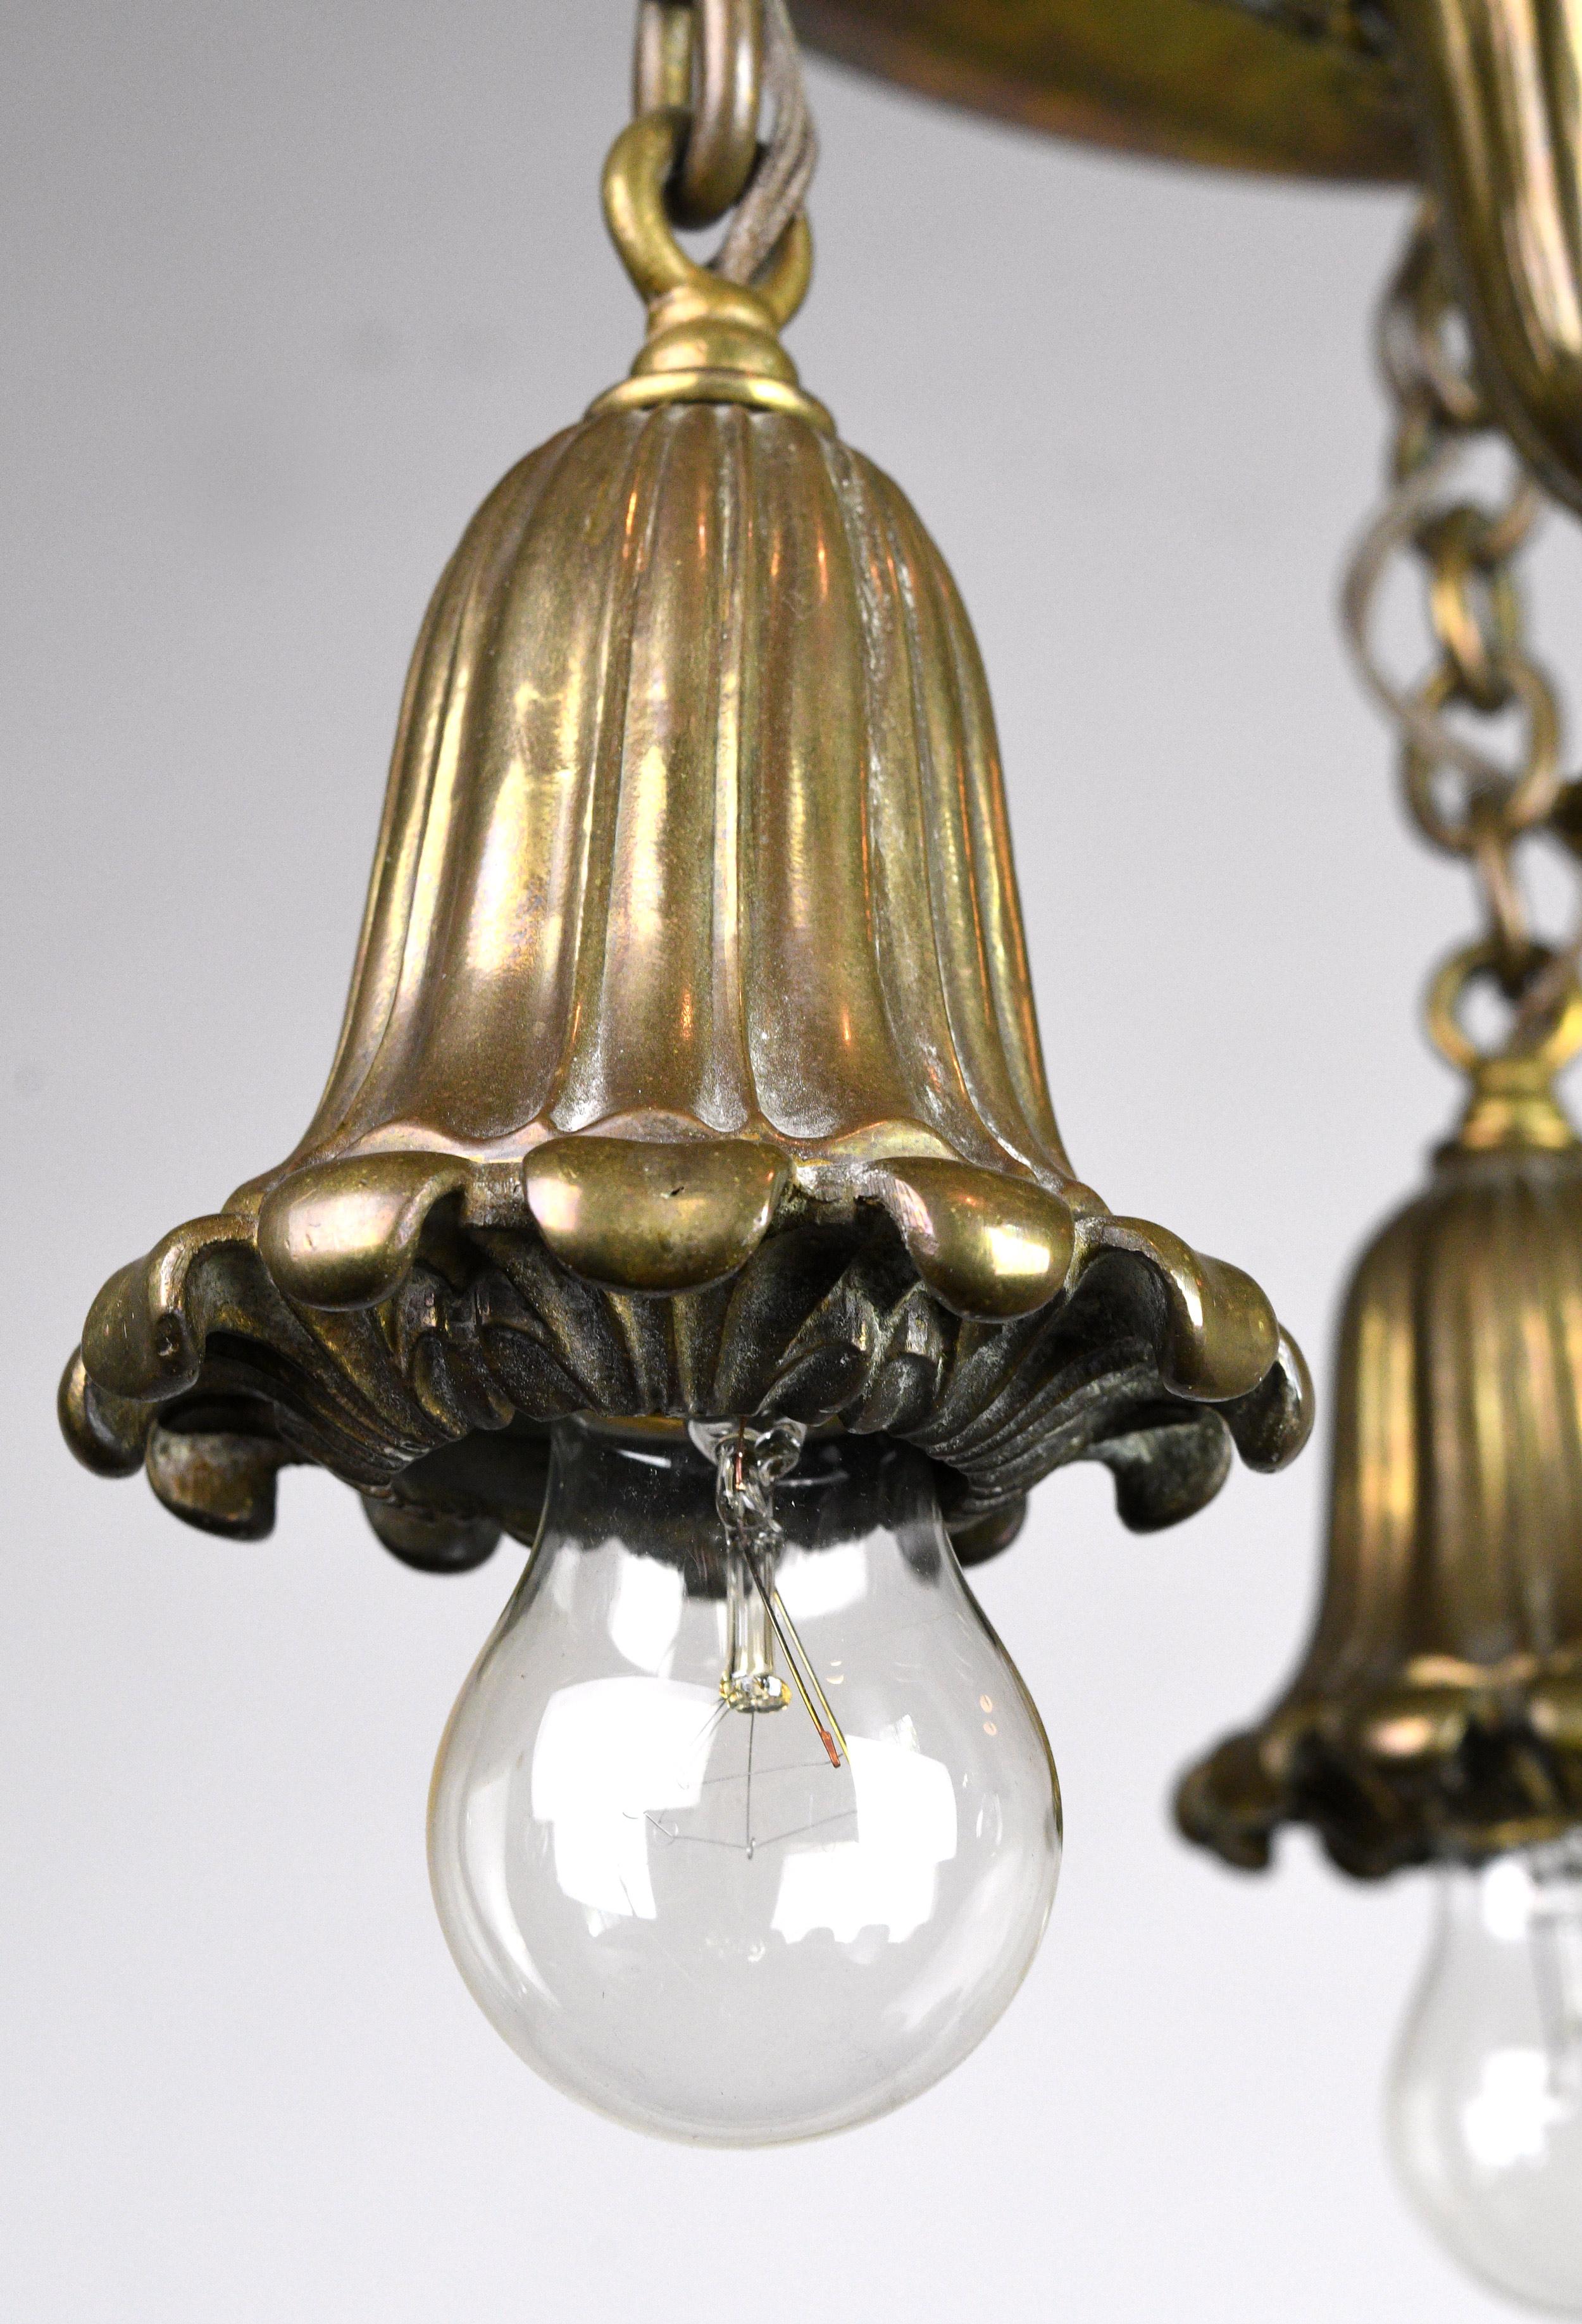 Elegant three-light cast brass bare bulb flush mount with a circular pan canopy. The brass has the perfect amount of luster; it’s bold, yet not over the top shiny. And organic detailing and ribbing on the body and arms add texture and visual